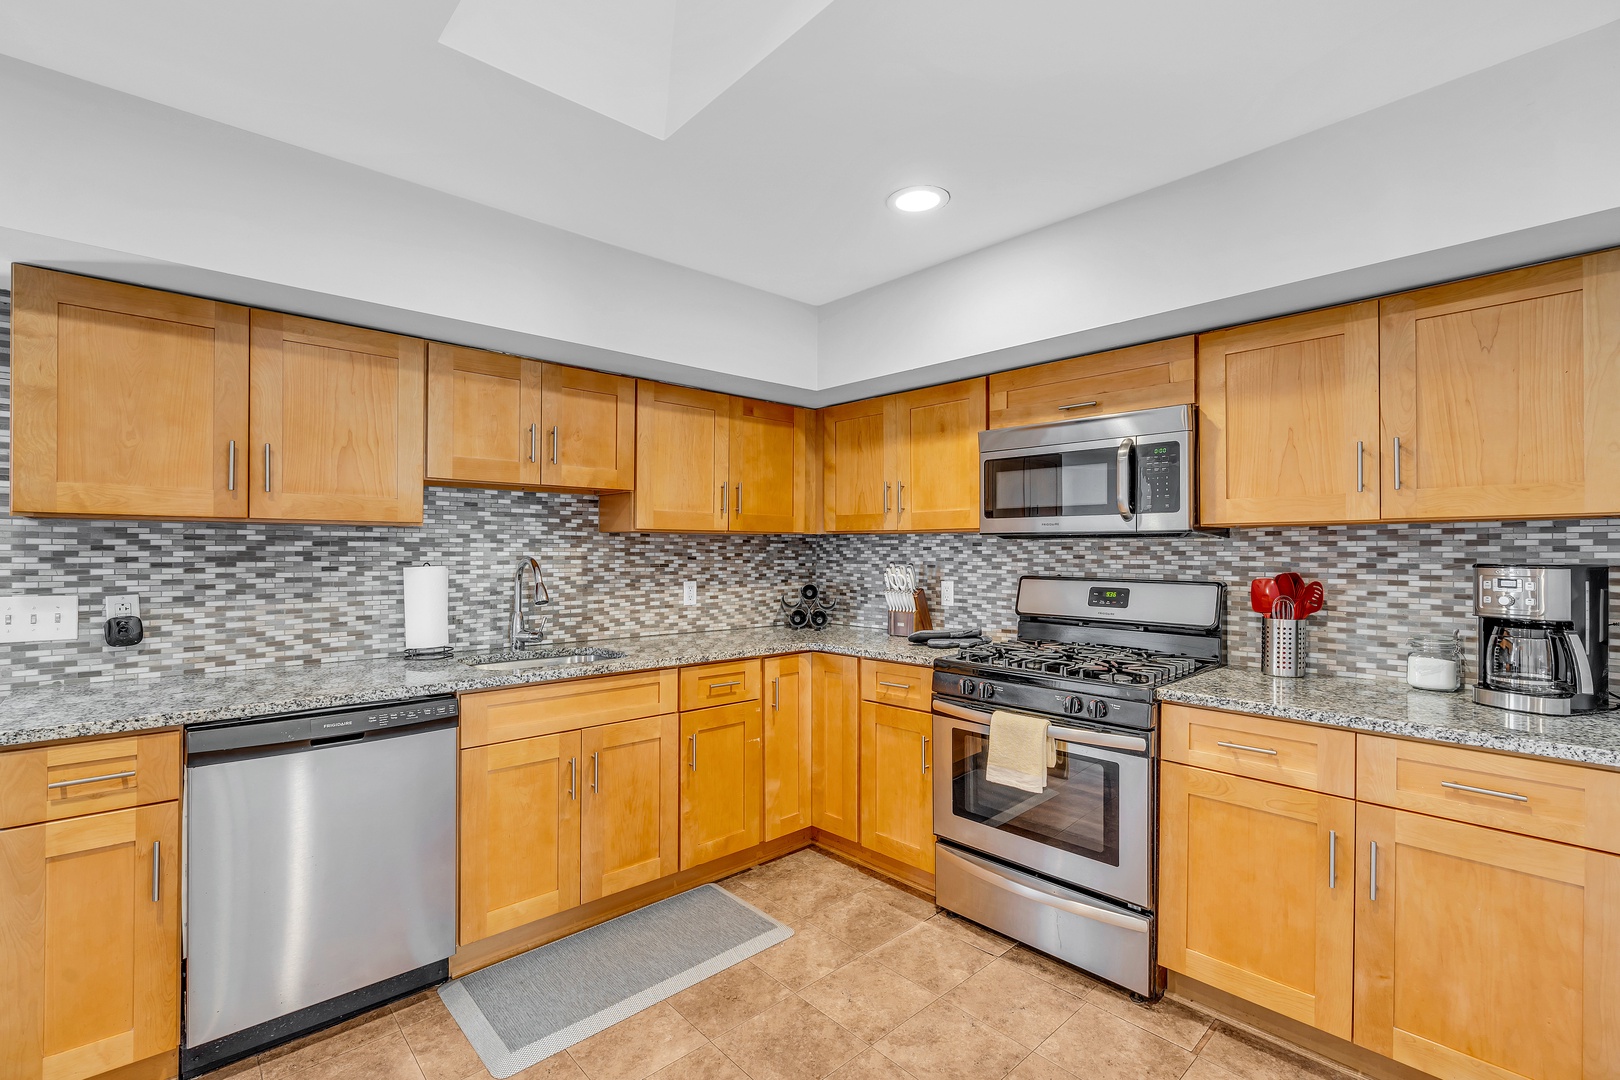 Whip up culinary delights in the spacious & well equipped kitchen